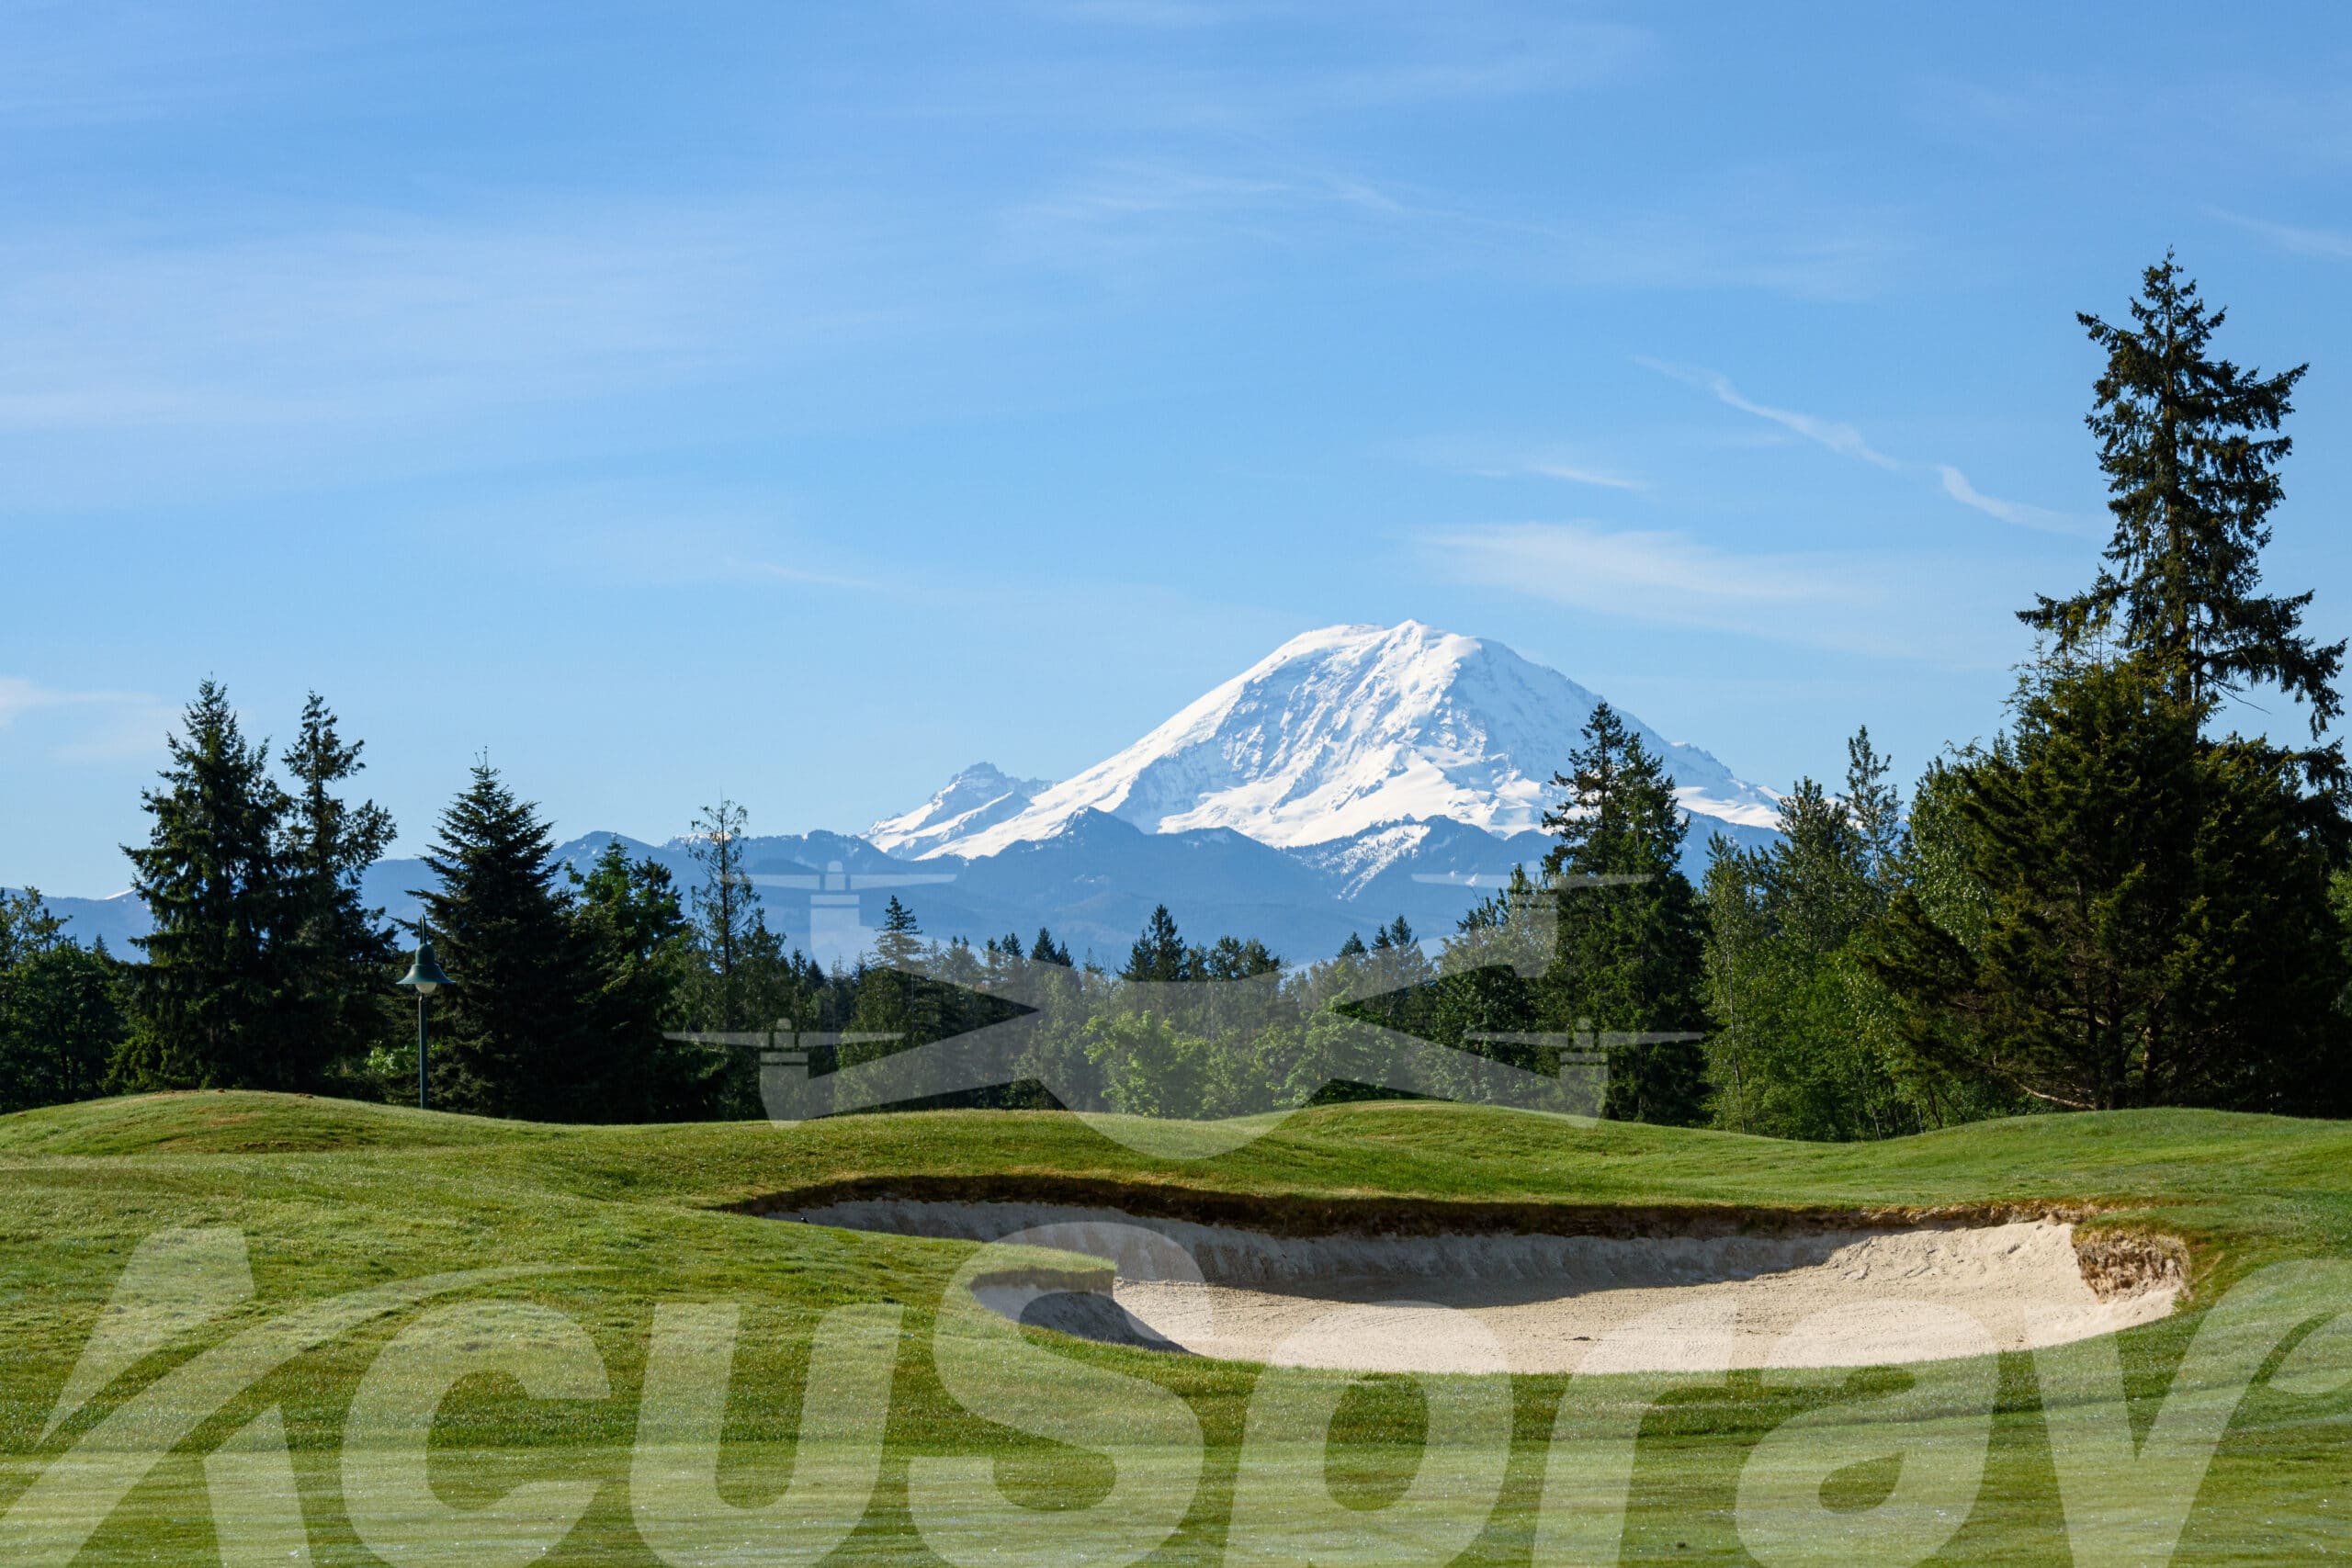 Green fairway with bright sand trap in foreground, majestic Mt Rainier standing tall in the background on a clear day.